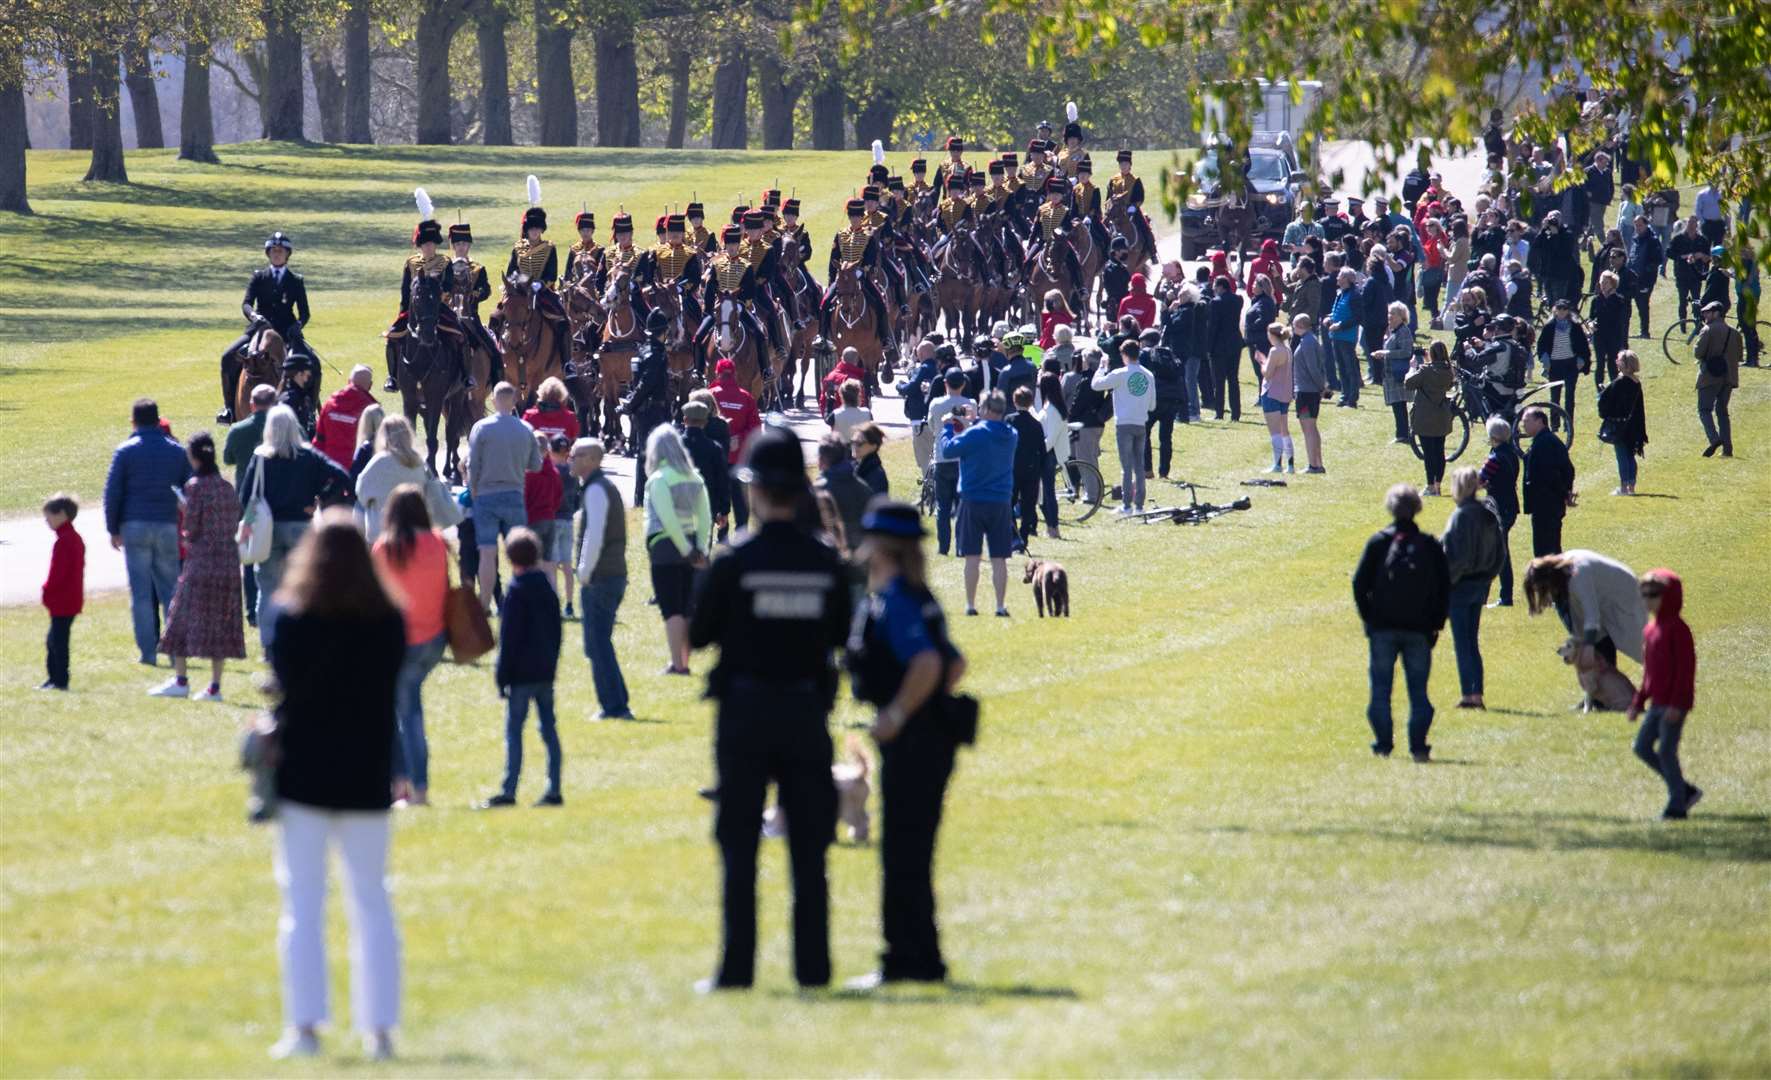 People gather on the Long Walk as the King’s Troop Royal Horse Artillery make their way towards Windsor Castle (Andrew Matthews/PA)